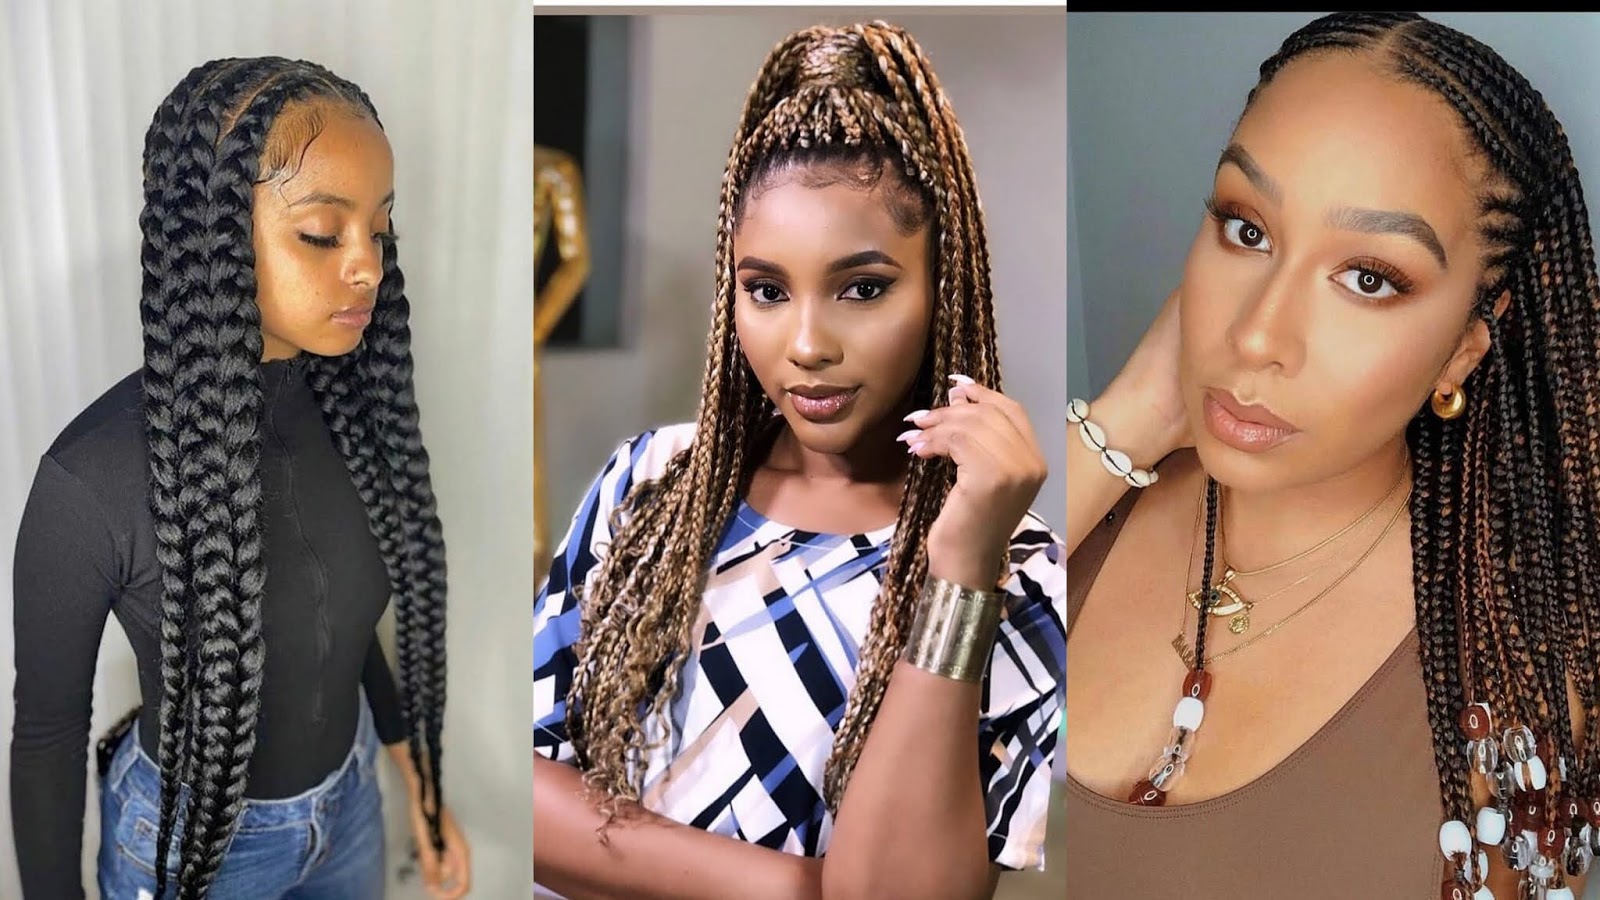 Box Braids Hairstyles 2020: Most awesome braids hairstyles you should ...